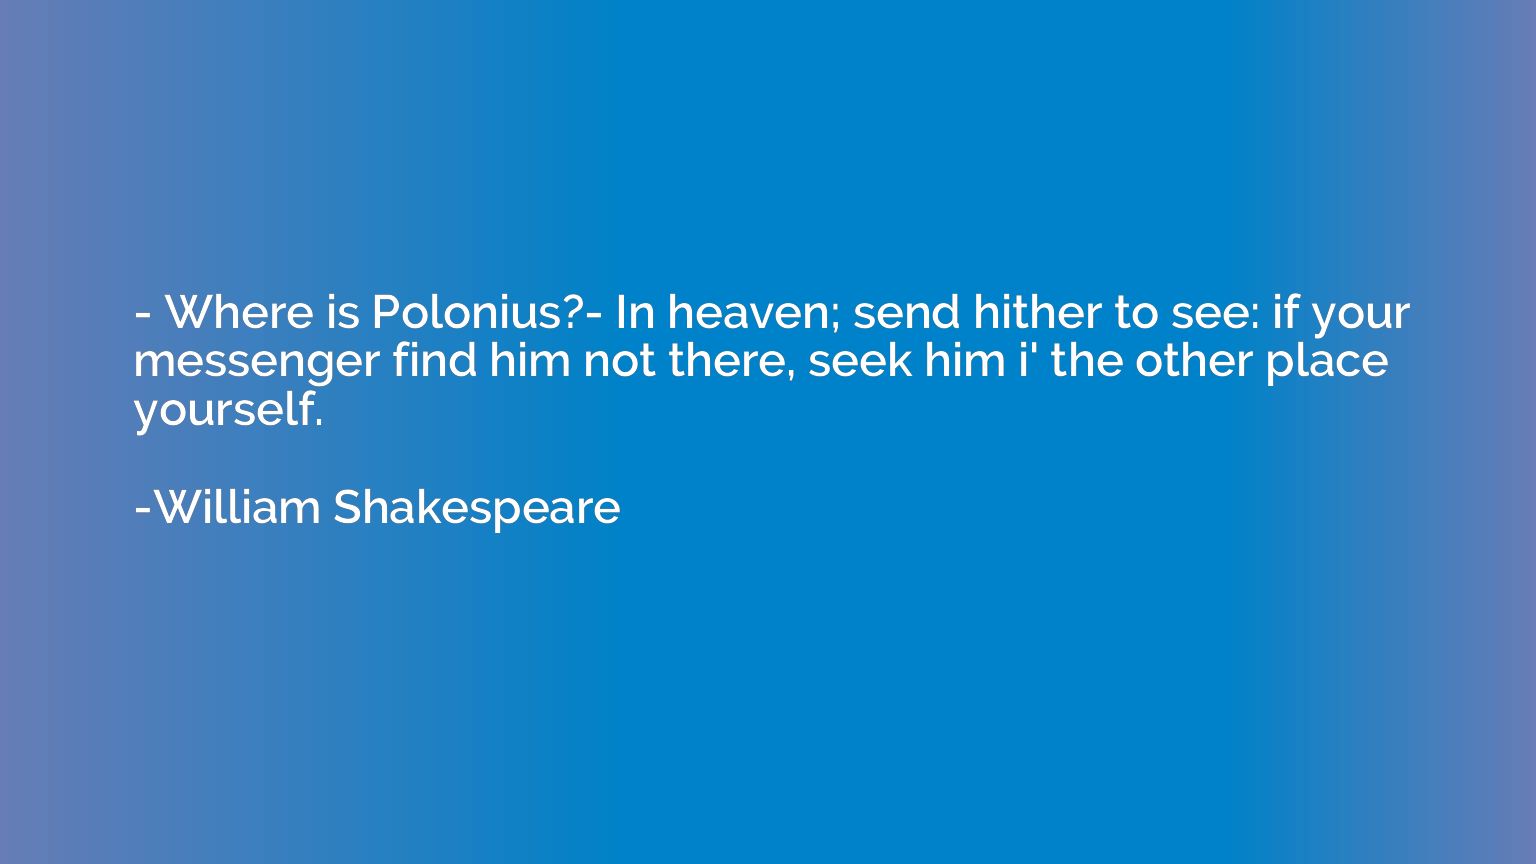 - Where is Polonius?- In heaven; send hither to see: if your